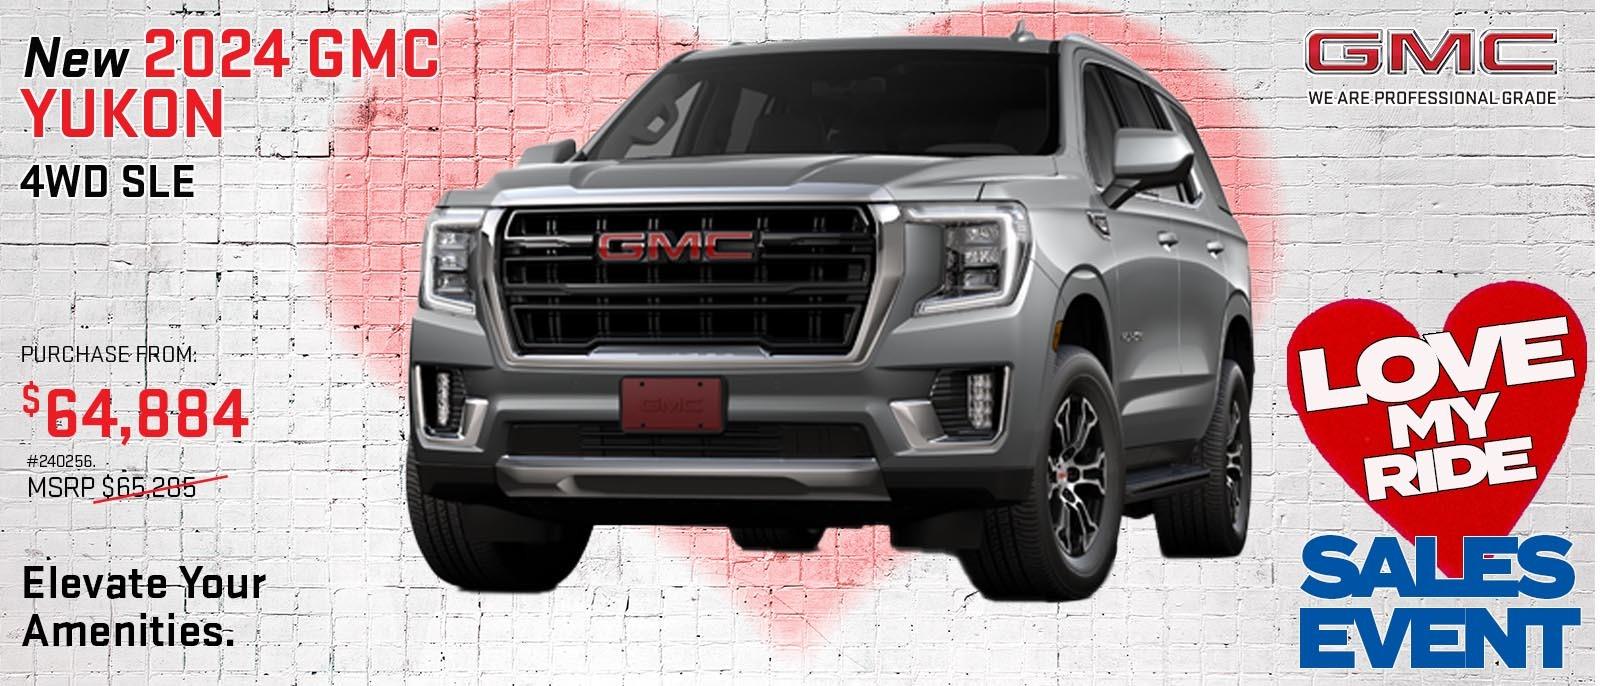 View the GMC Yukon Special in Denver at Shortline